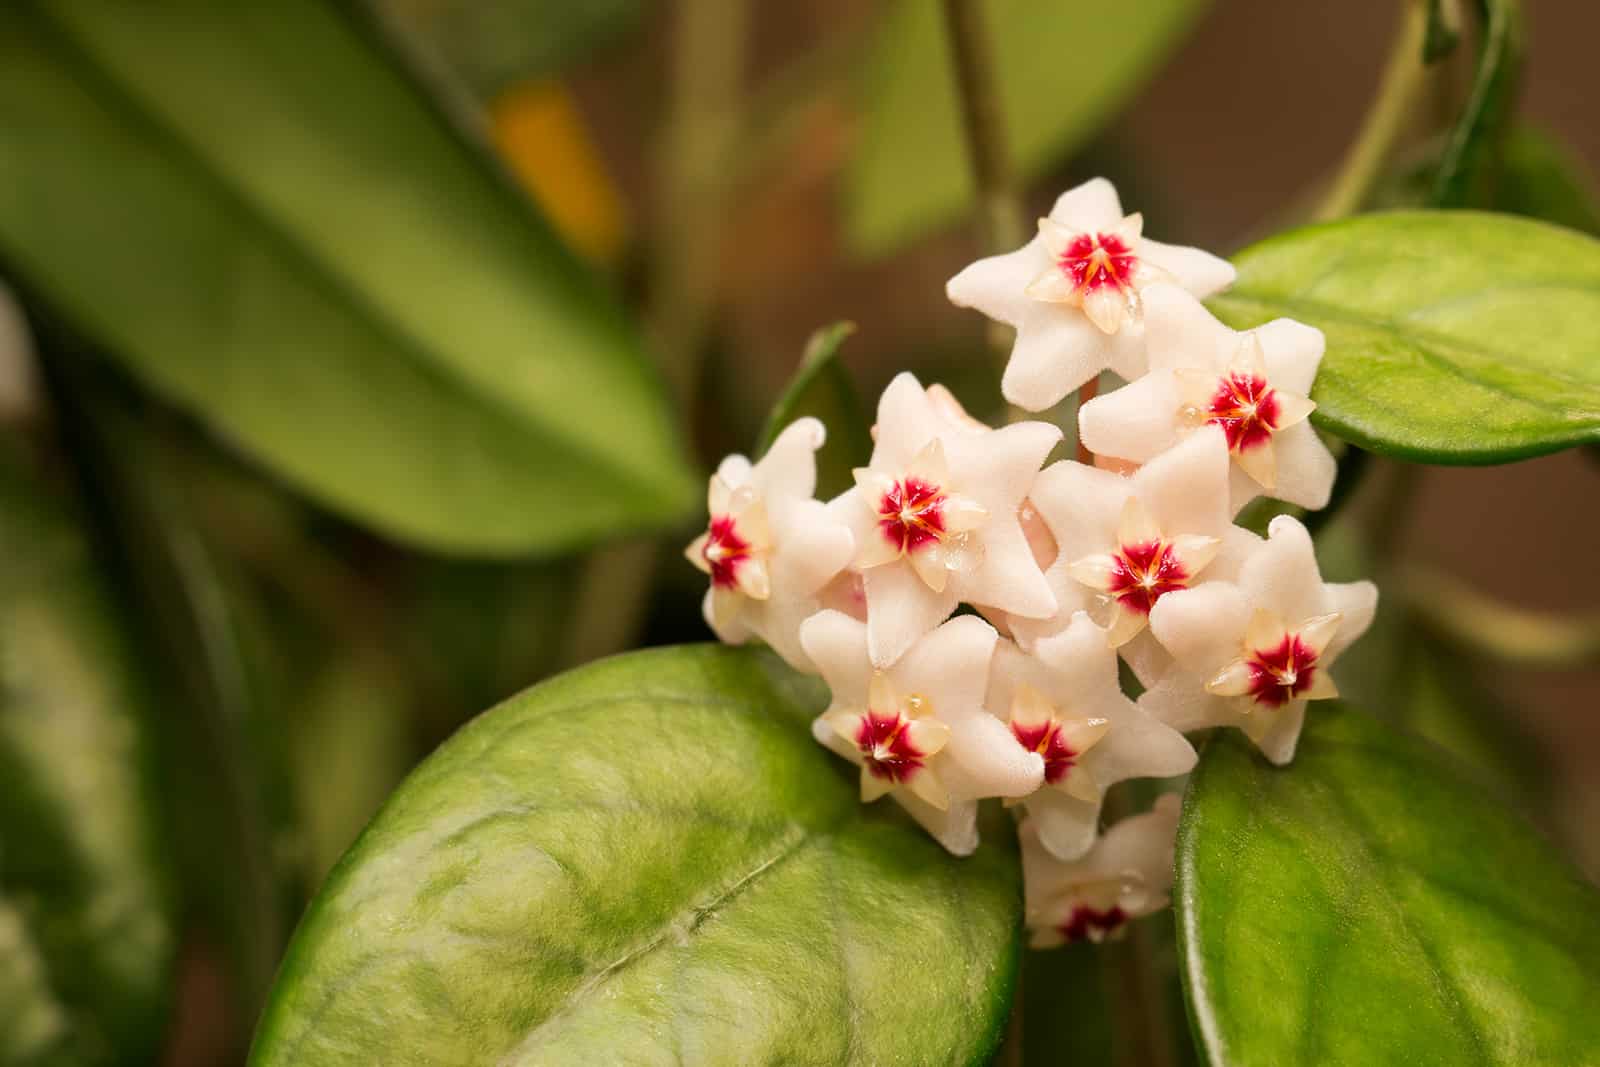 Hoya Fungii: Features, Care Guide, And Common Issues